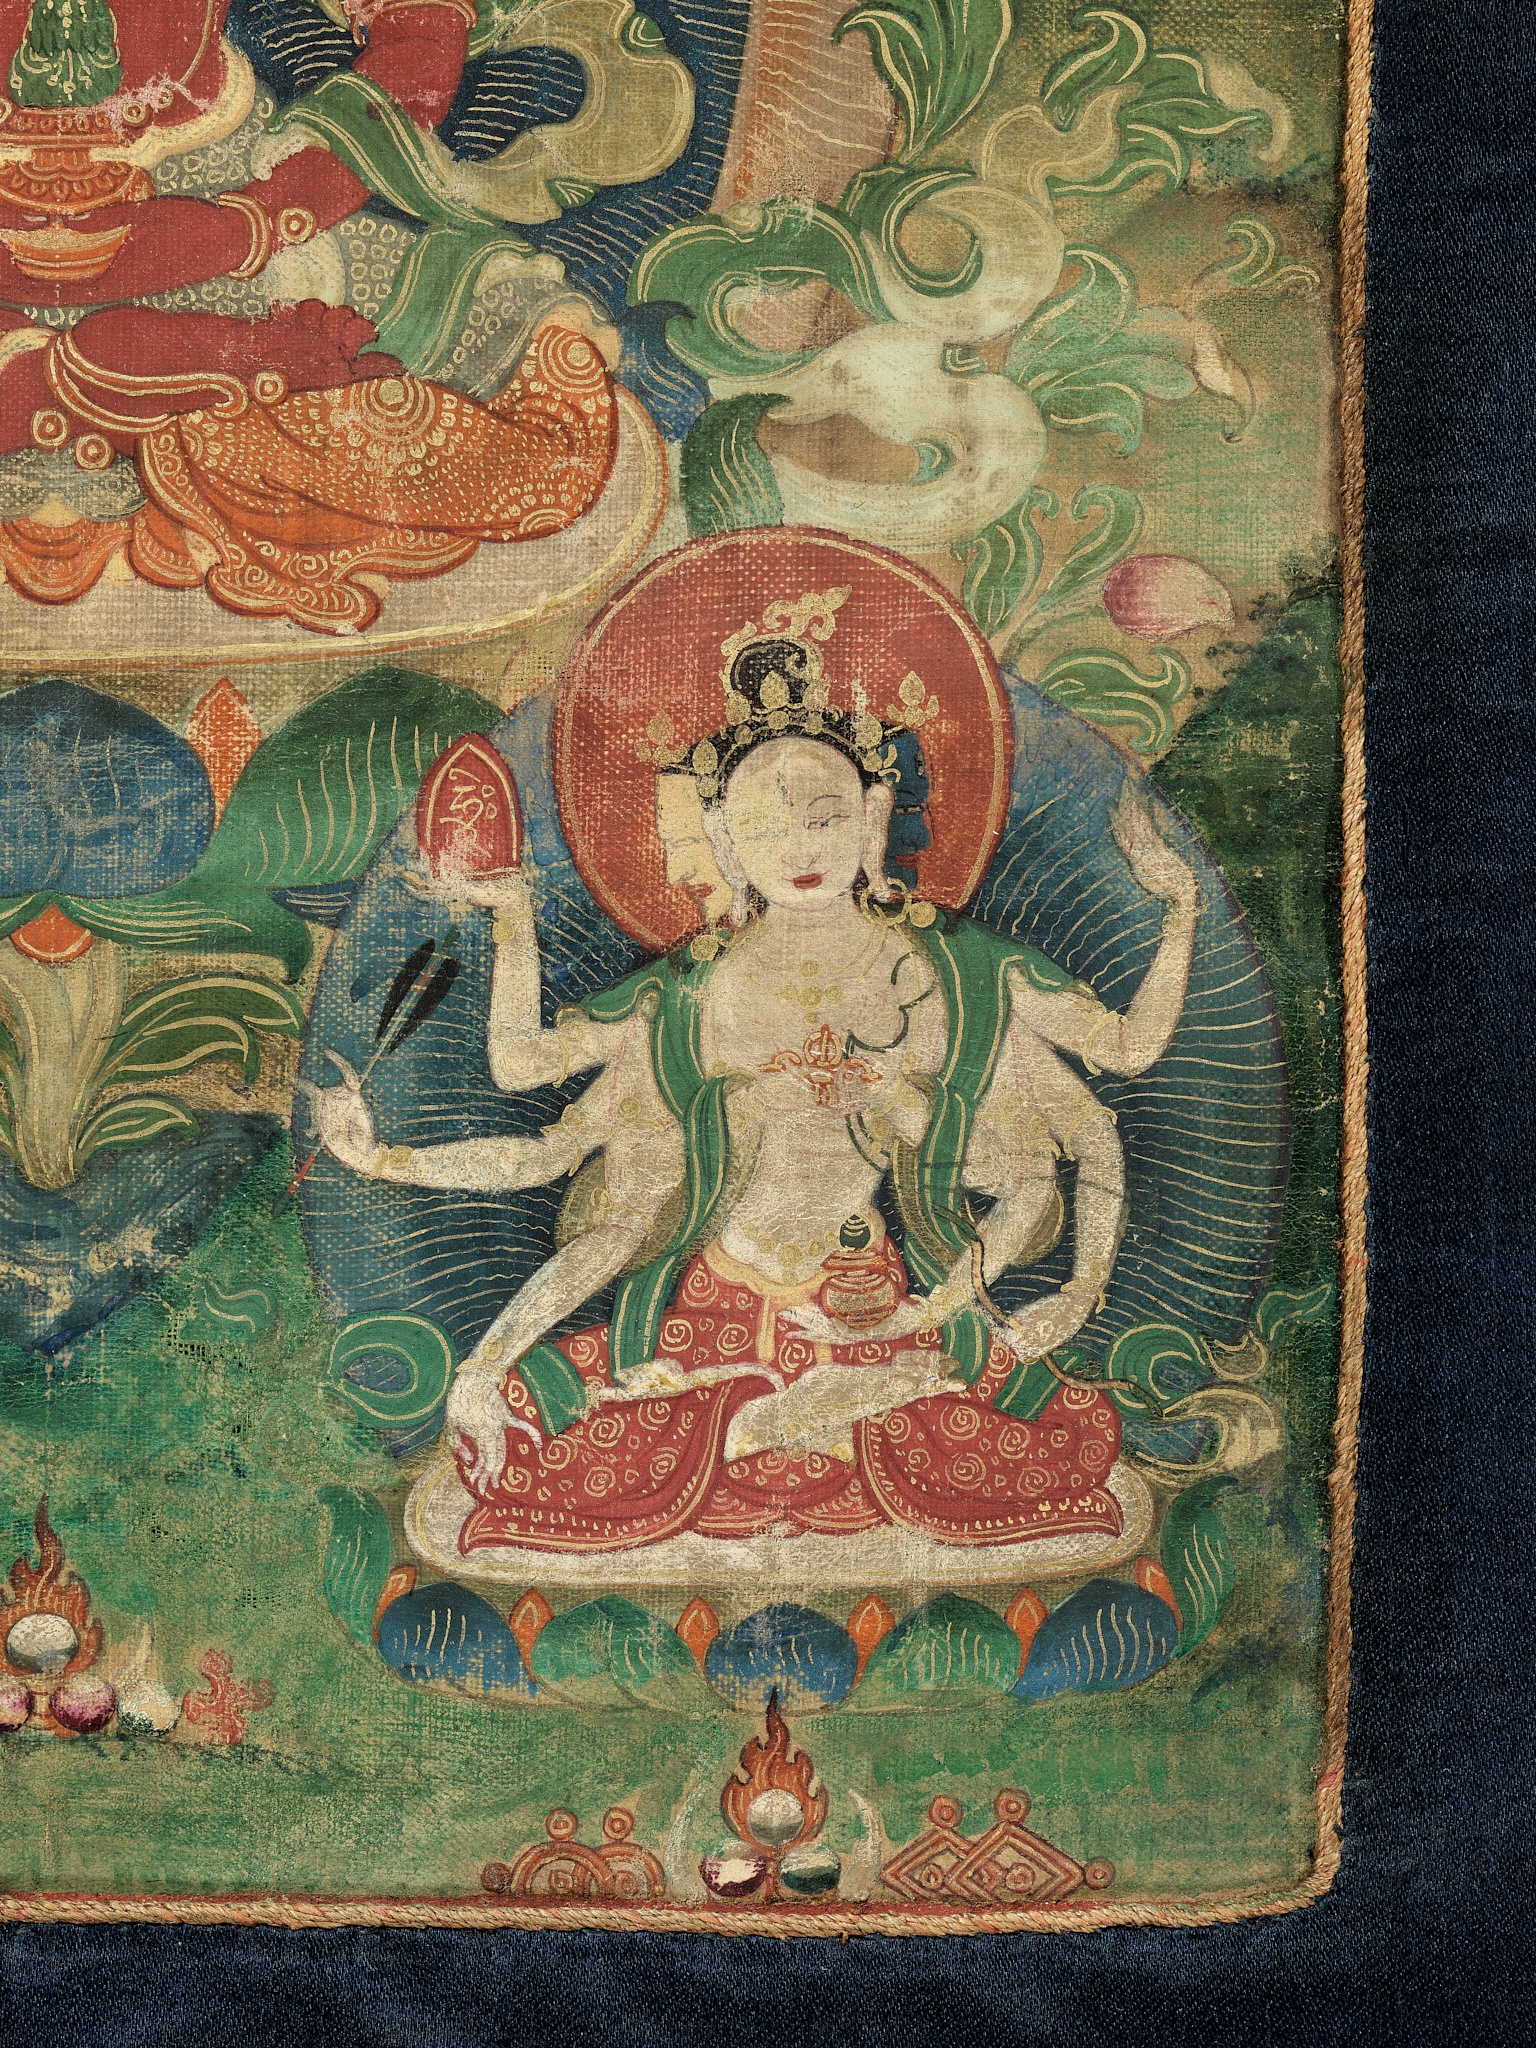 A THANGKA OF RED AMITAYUS, TIBET, 18TH CENTURY - Image 8 of 10